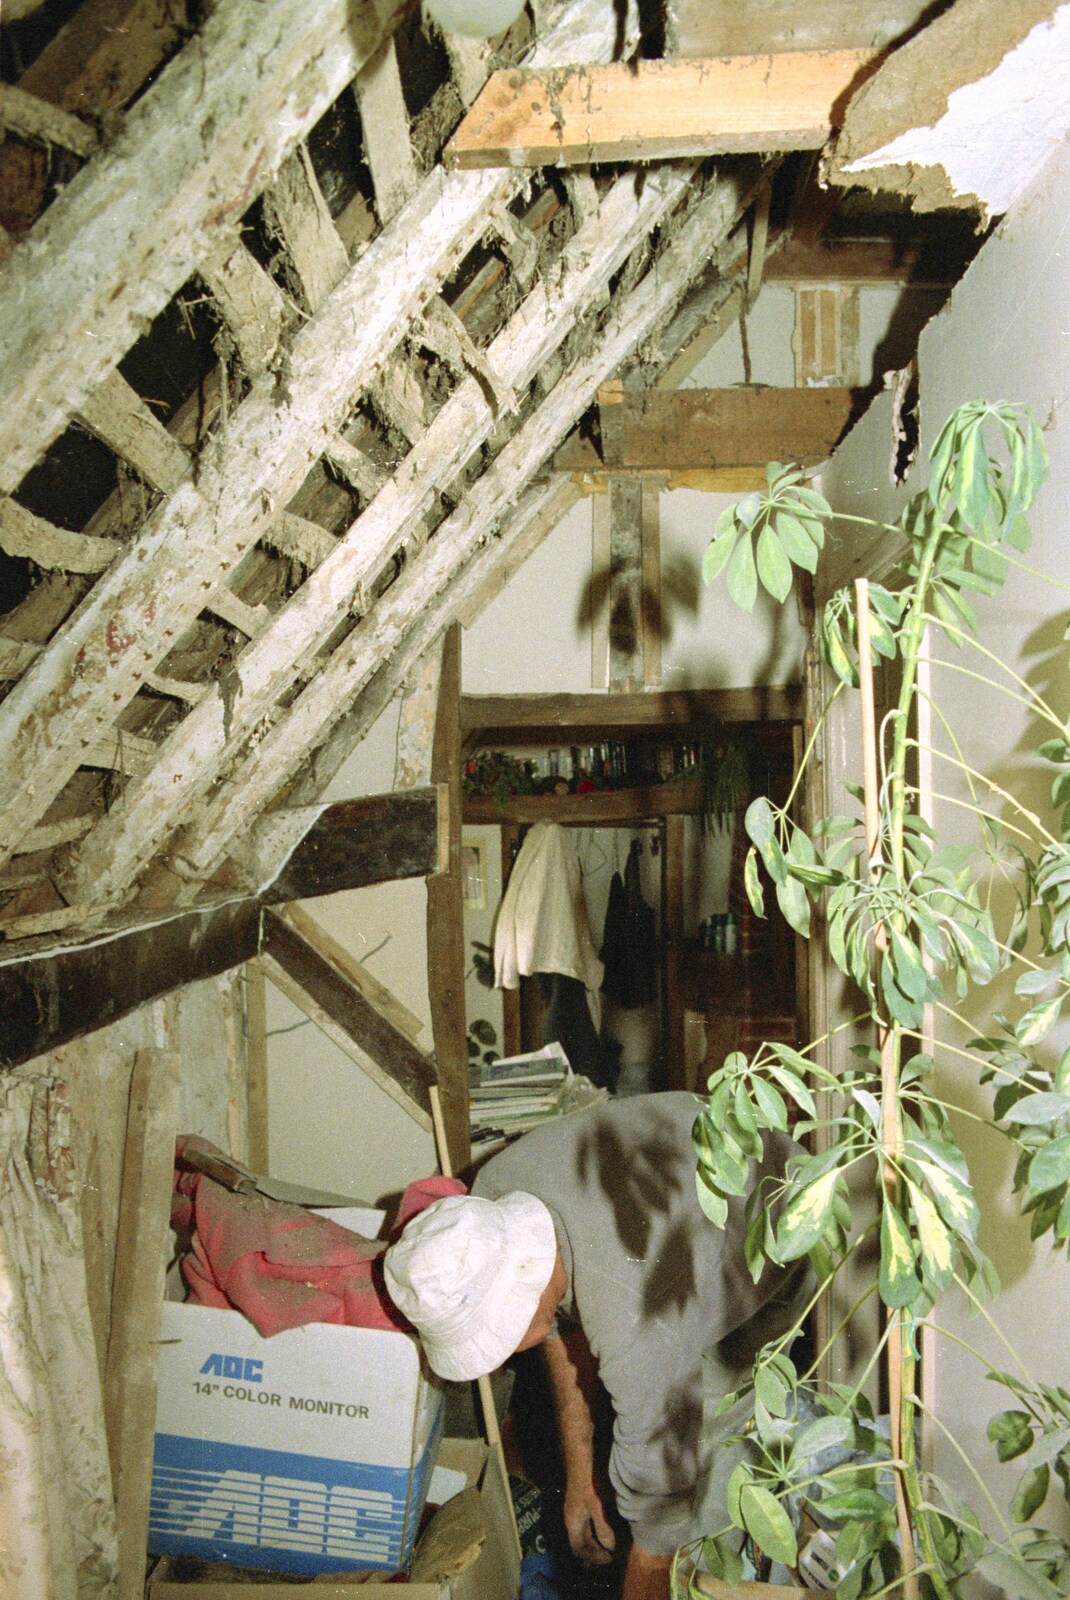 The Old Man roams around on the landing from Hale-Bopp and Bedroom Demolition, Brome, Suffolk - 10th May 1997